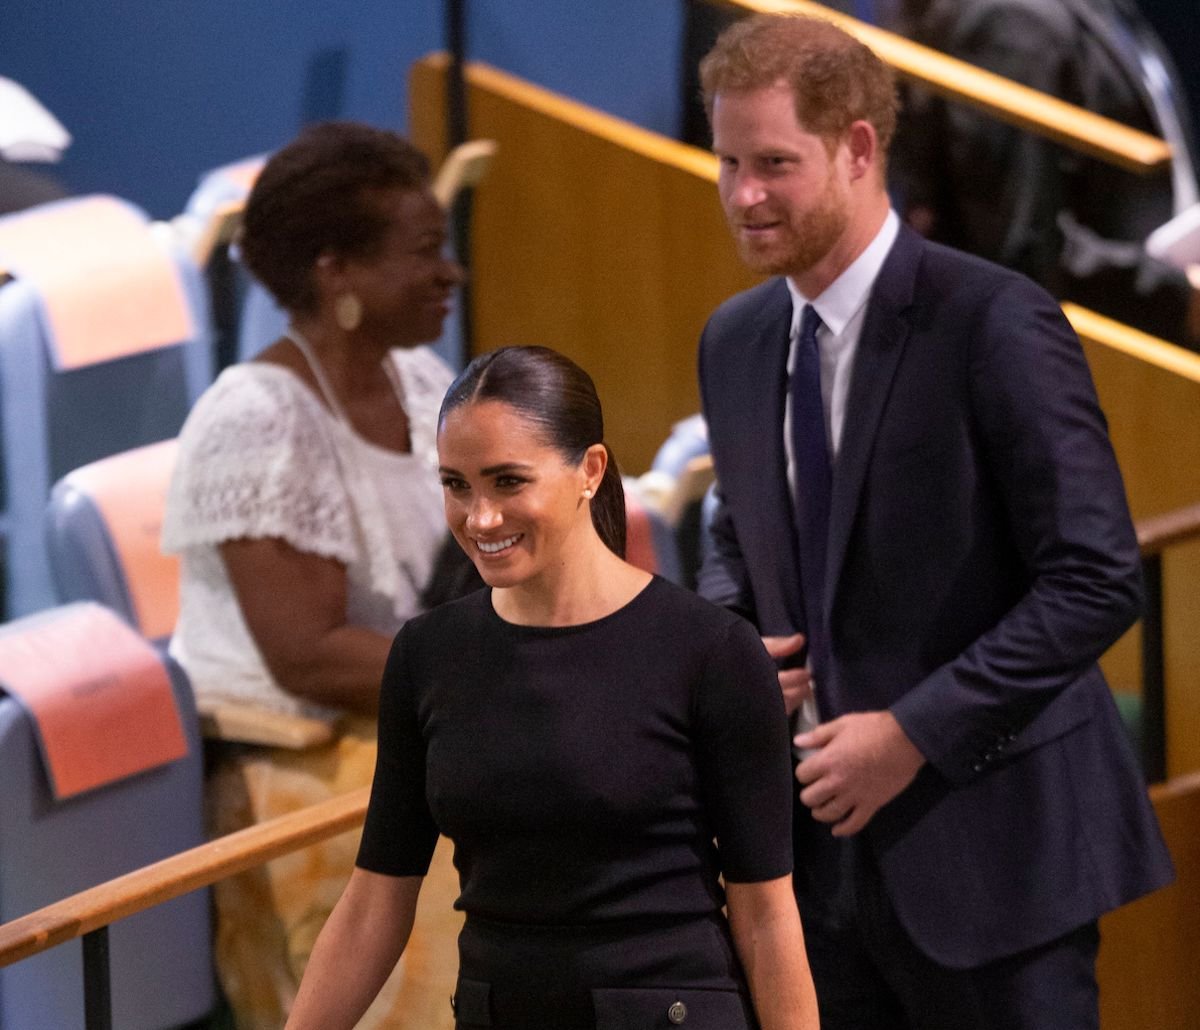 Meghan Markle, who Tom Bower says Prince Harry saw Princess Diana 'magic' in, walks in front of Prince Harry